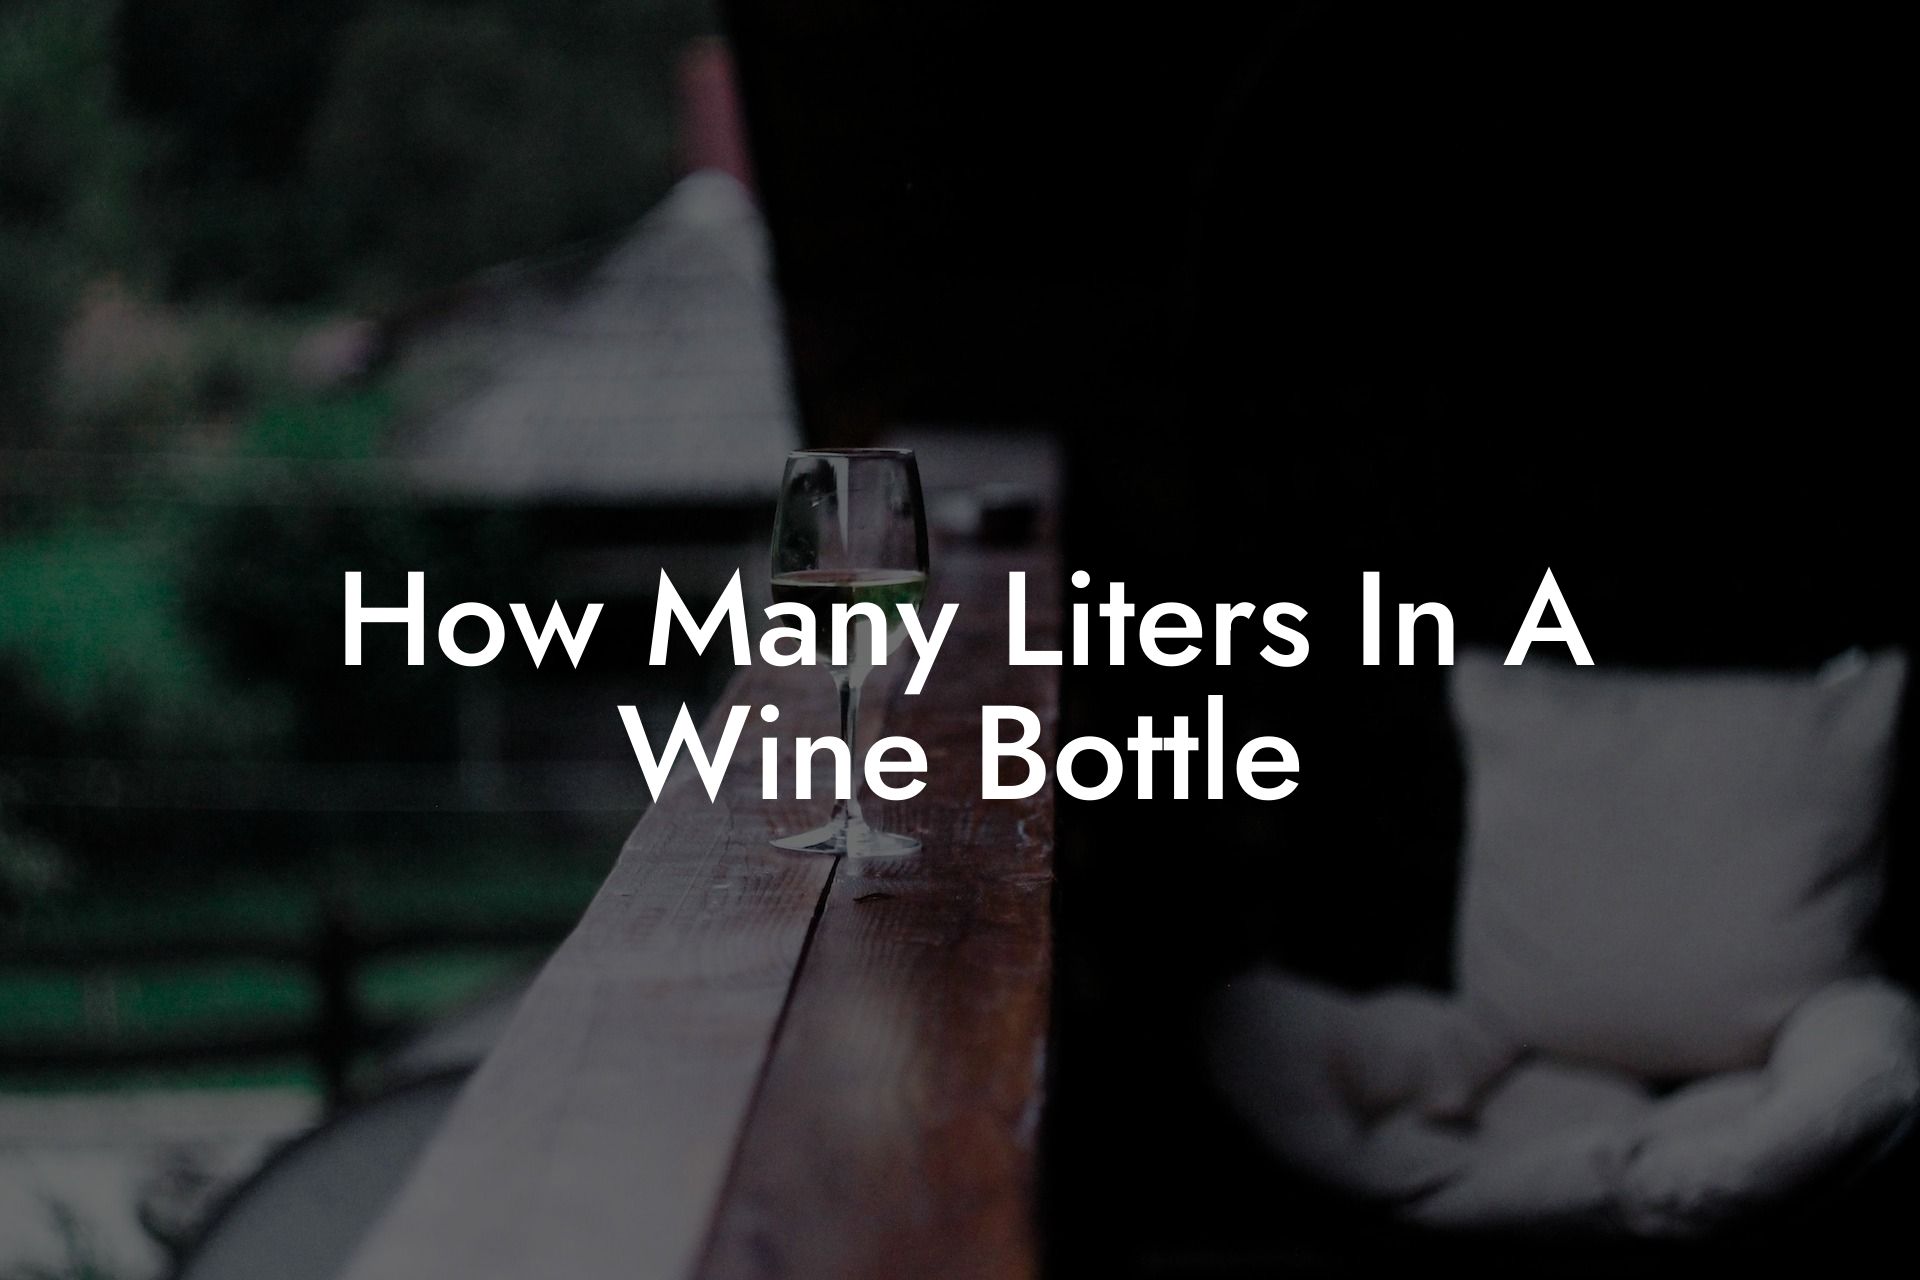 How Many Liters In A Wine Bottle